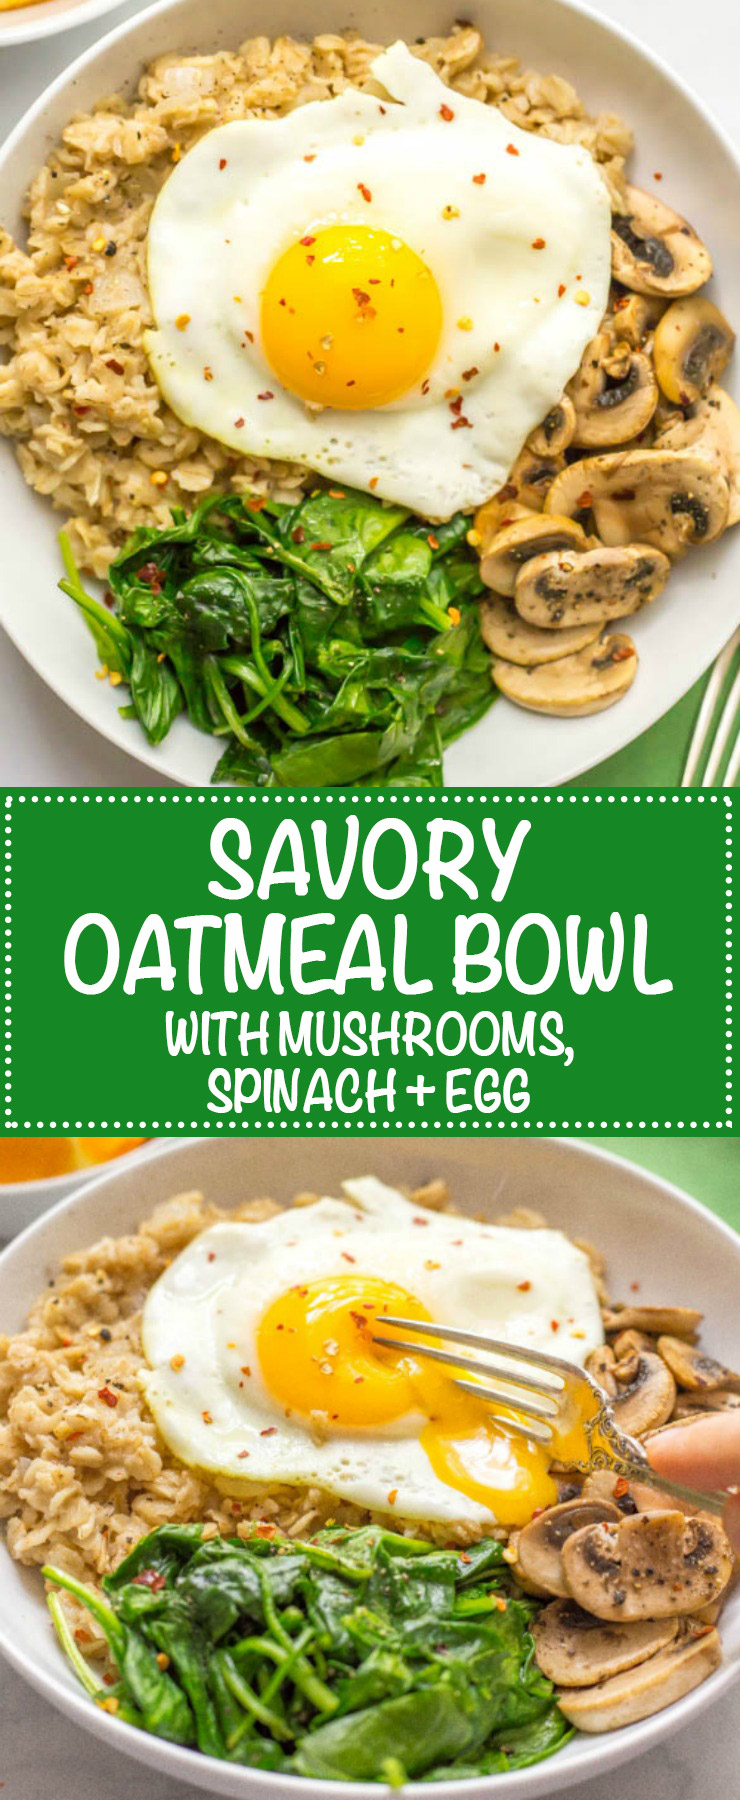 Savory oatmeal bowl with sauteed mushrooms, spinach and a fried egg on top in a bowl photo collage